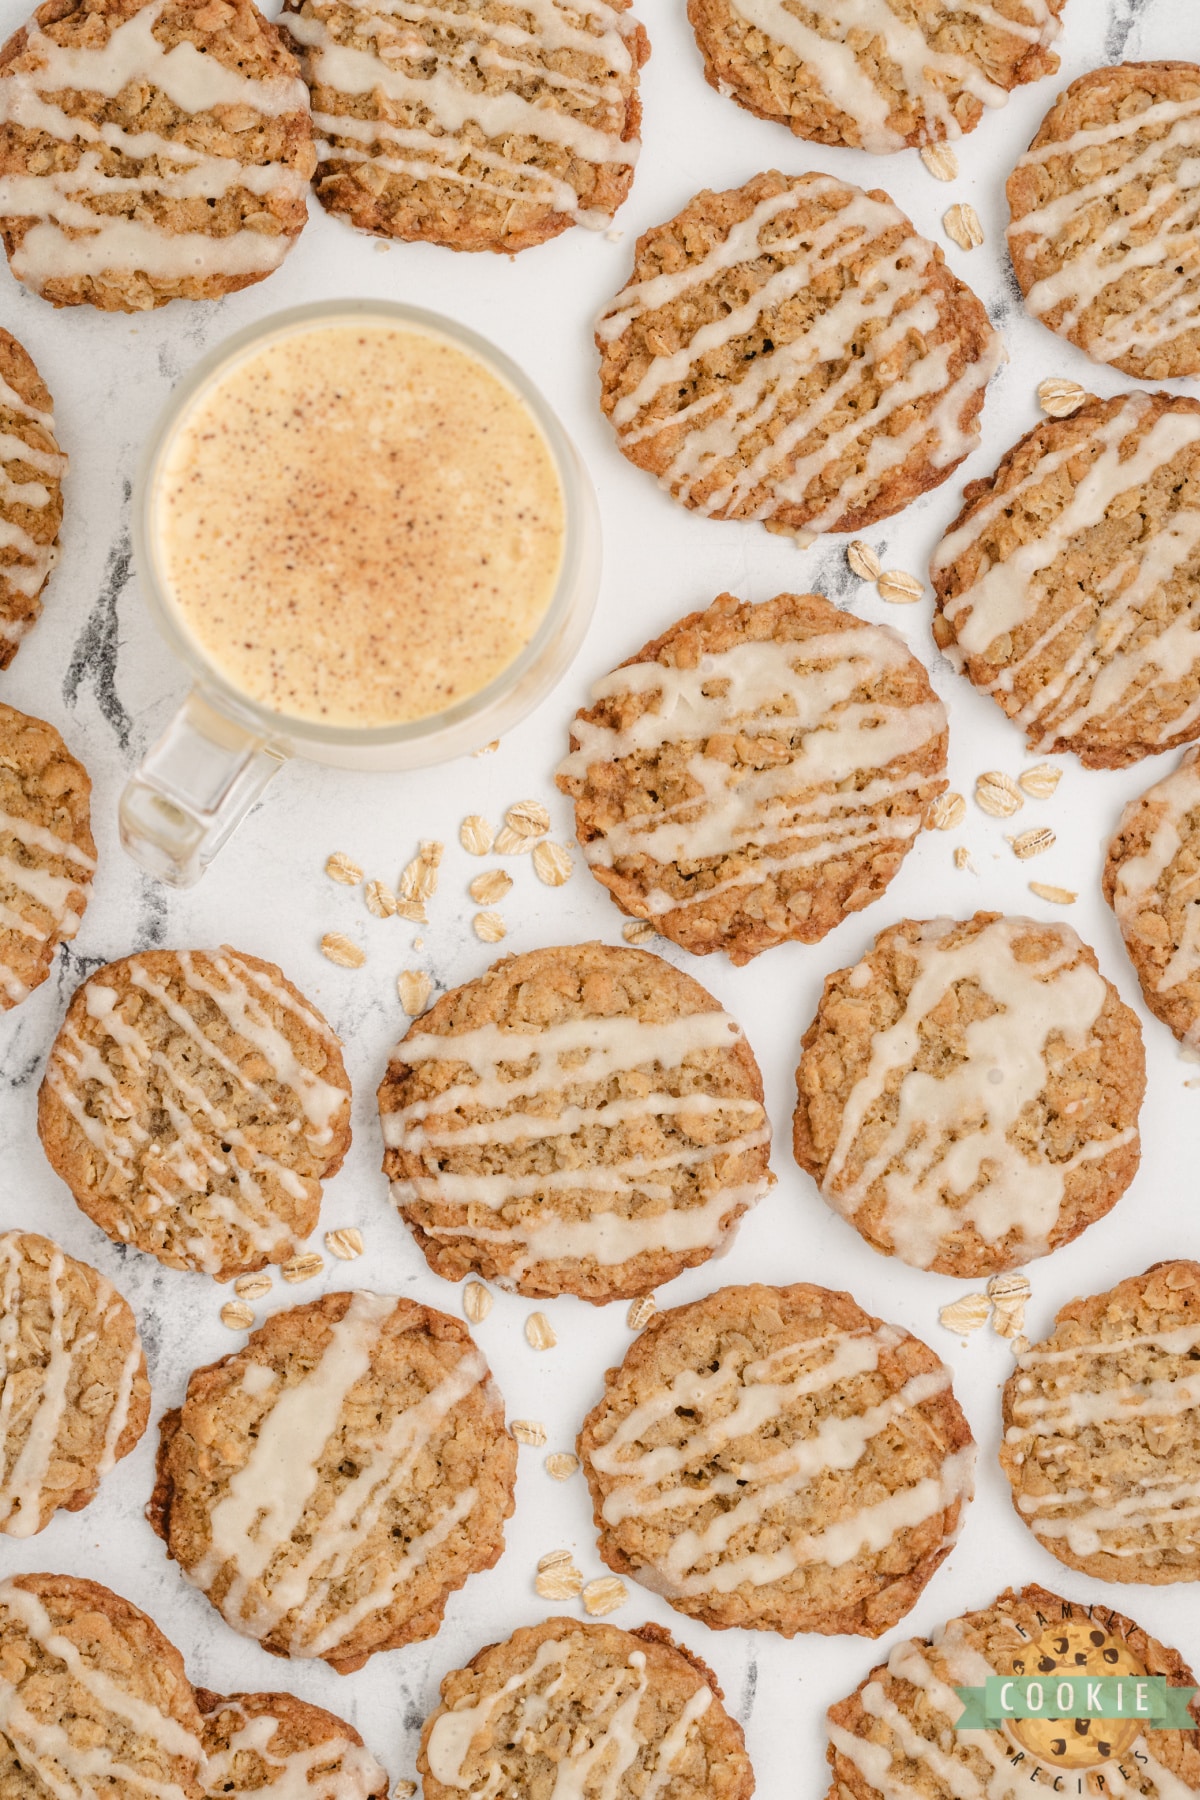 Oatmeal cookies made with eggnog.